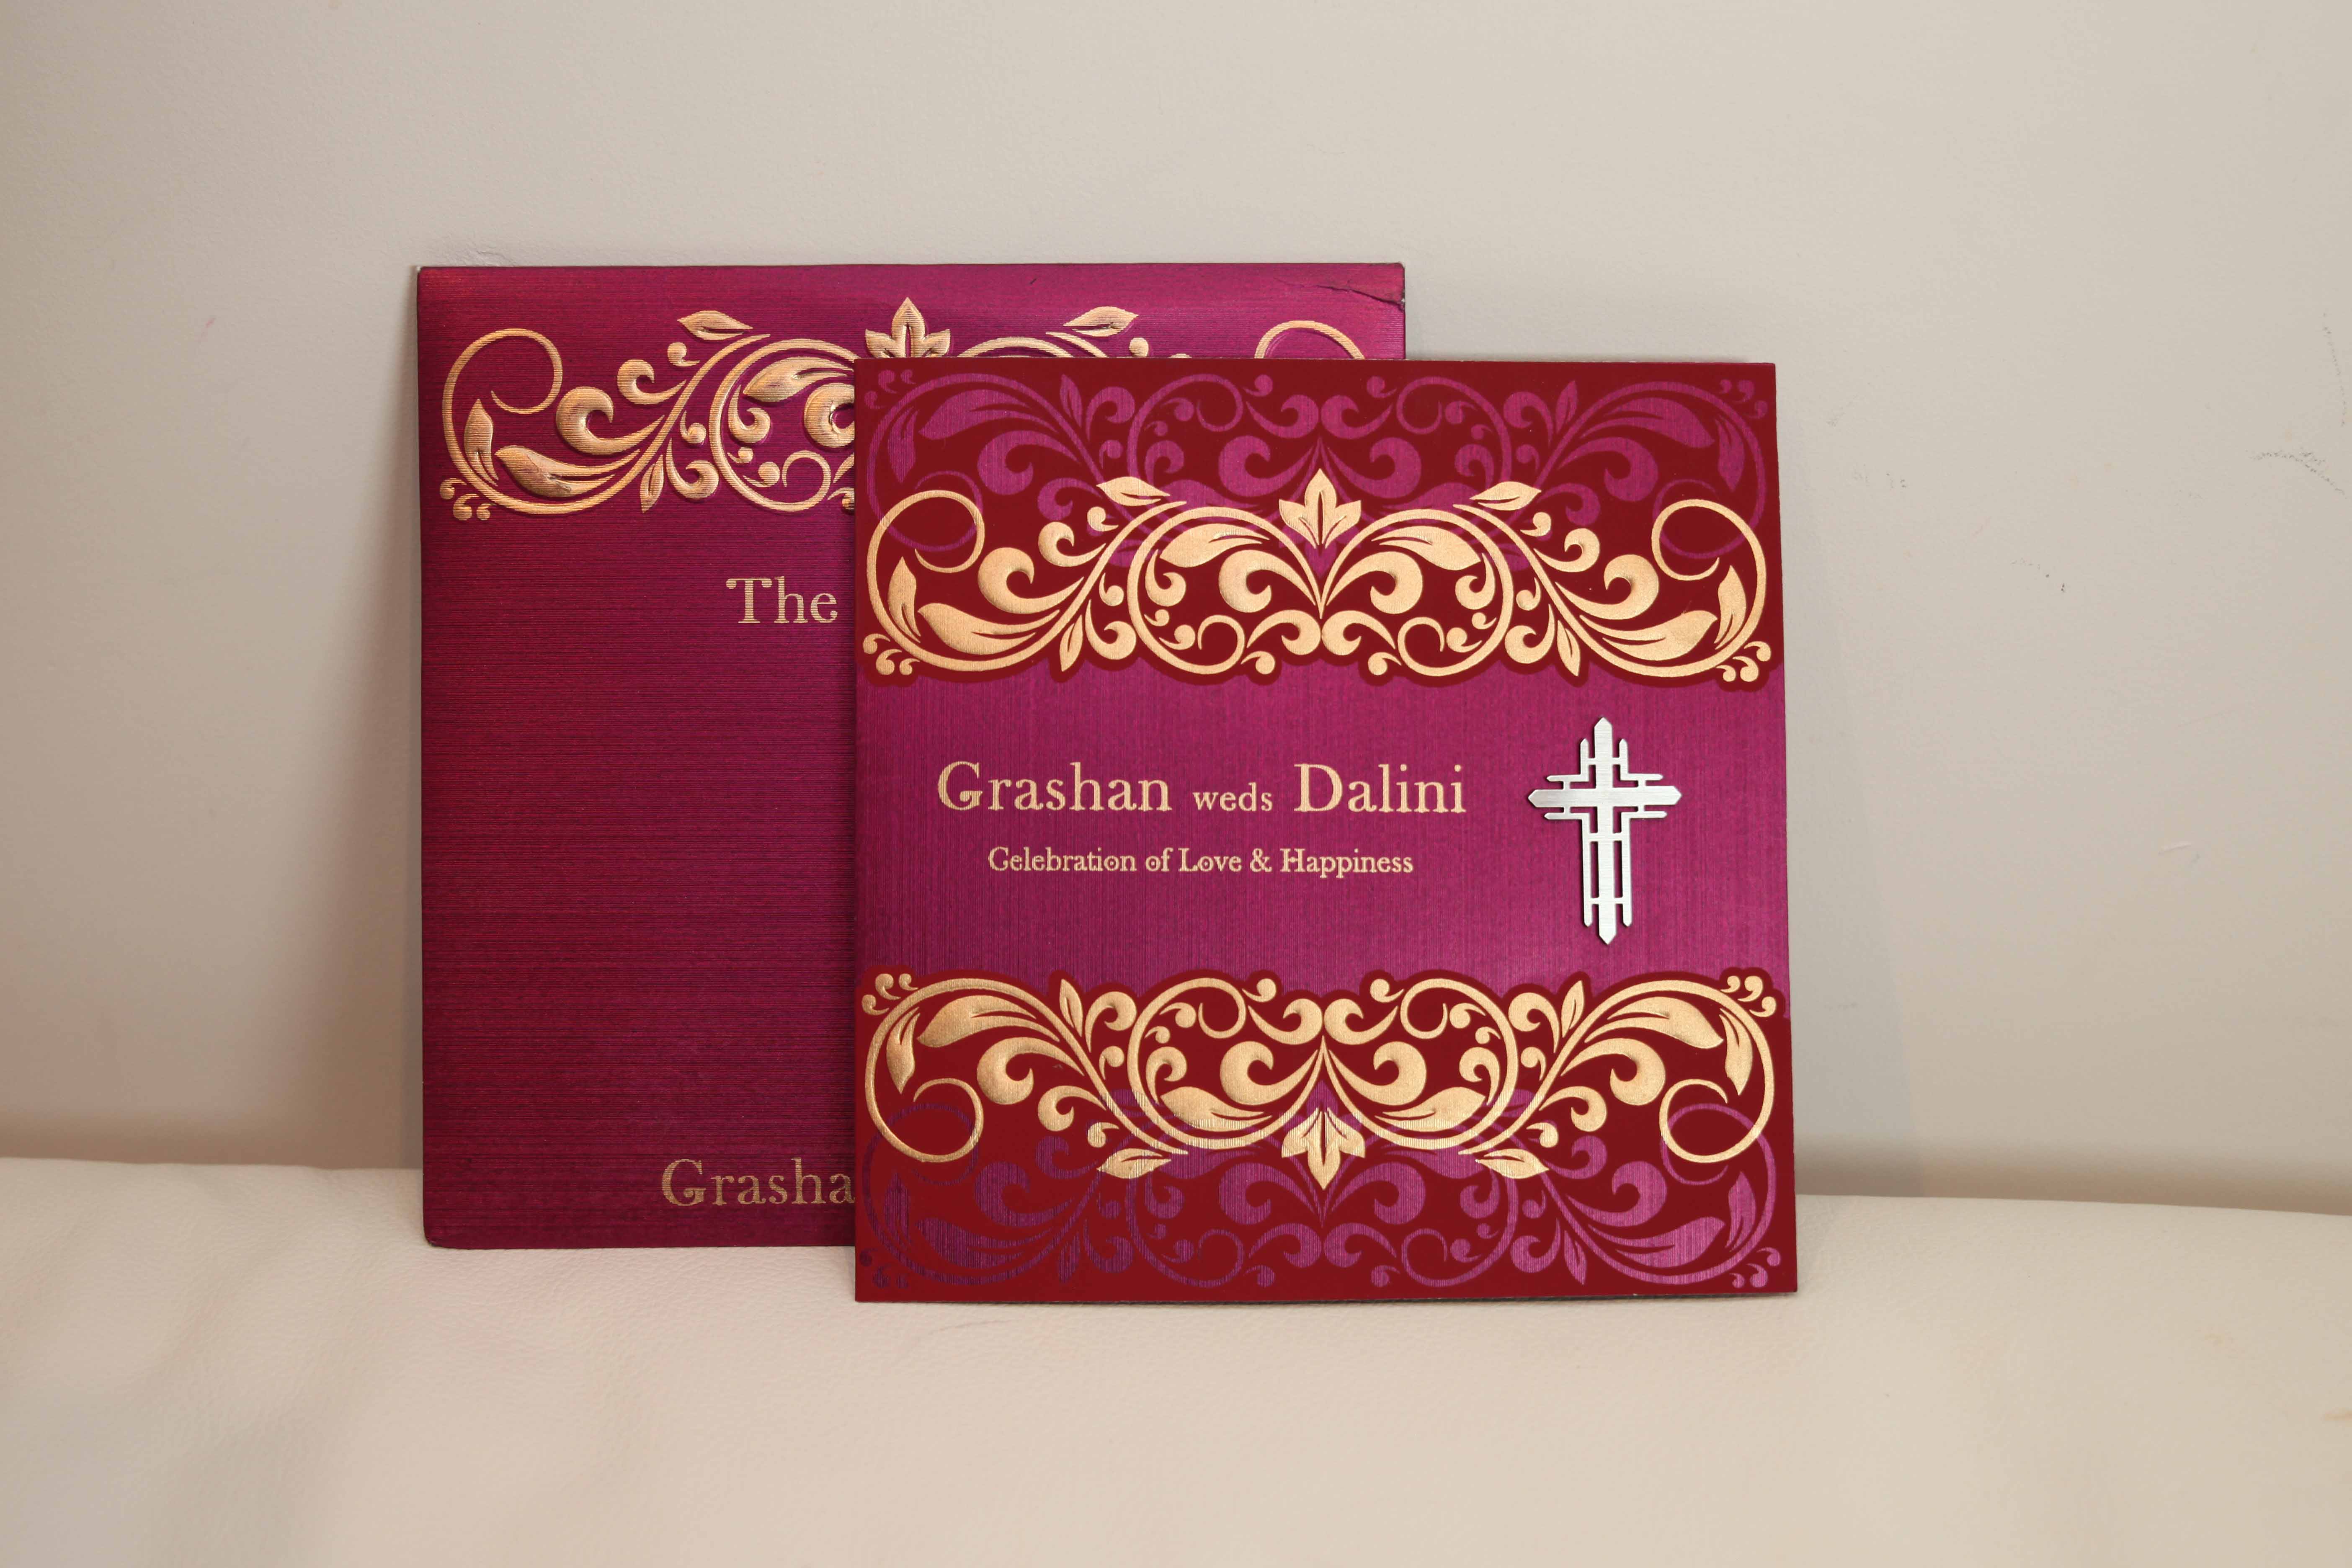 Hindu wedding Cards is a well known brand in the UK